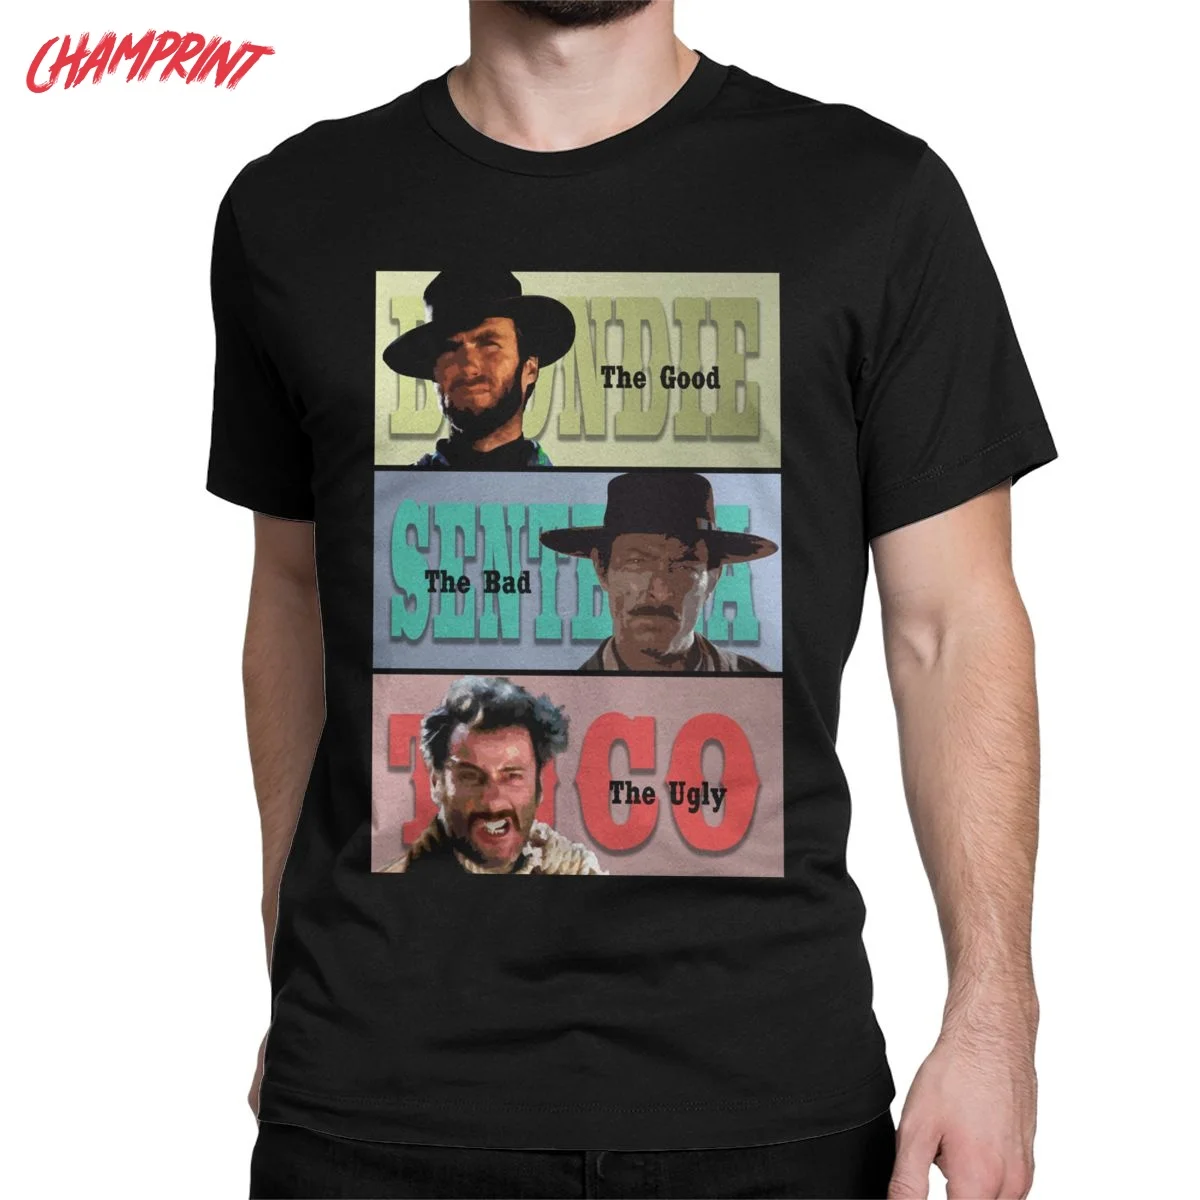 Men's T-Shirts The Good The Bad And Ugly Vintage 100% Cotton Tee Shirt Short Sleeve Cowboy Blondie Angel T Shirt Crew Neck Tops